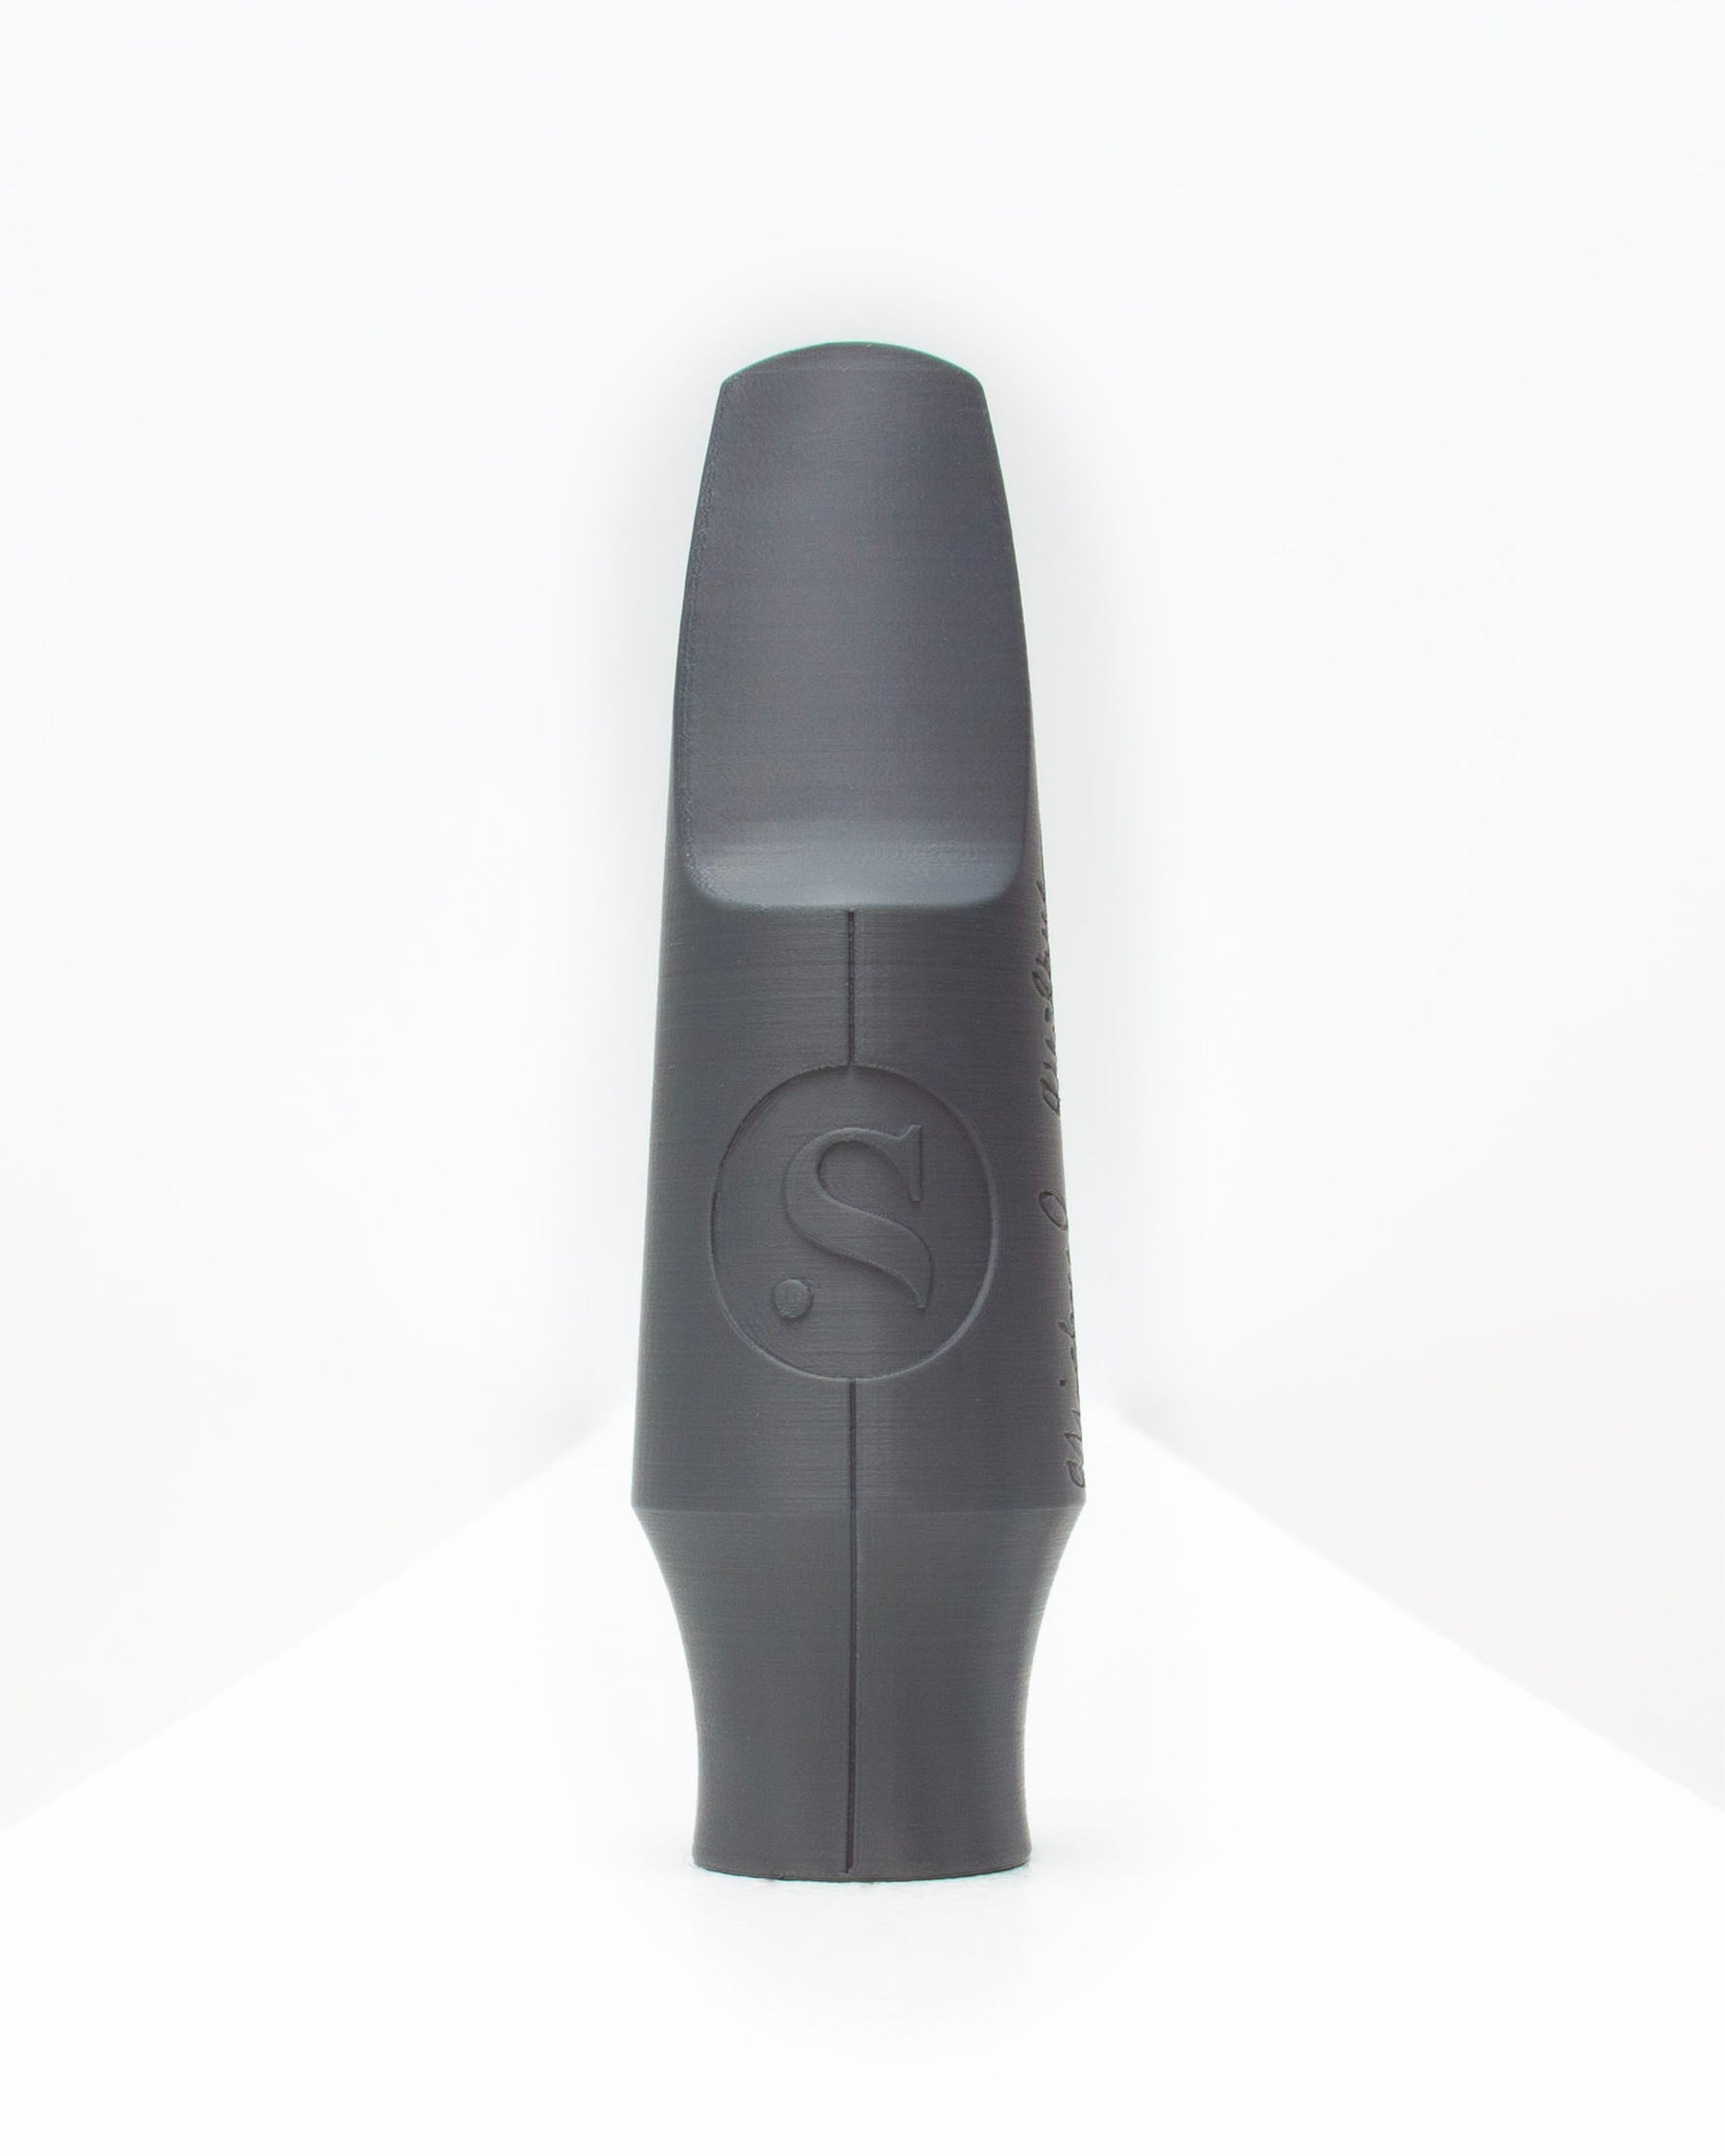 Tenor Signature Saxophone mouthpiece - Michael Wilbur by Syos - 9 / Anthracite Metal